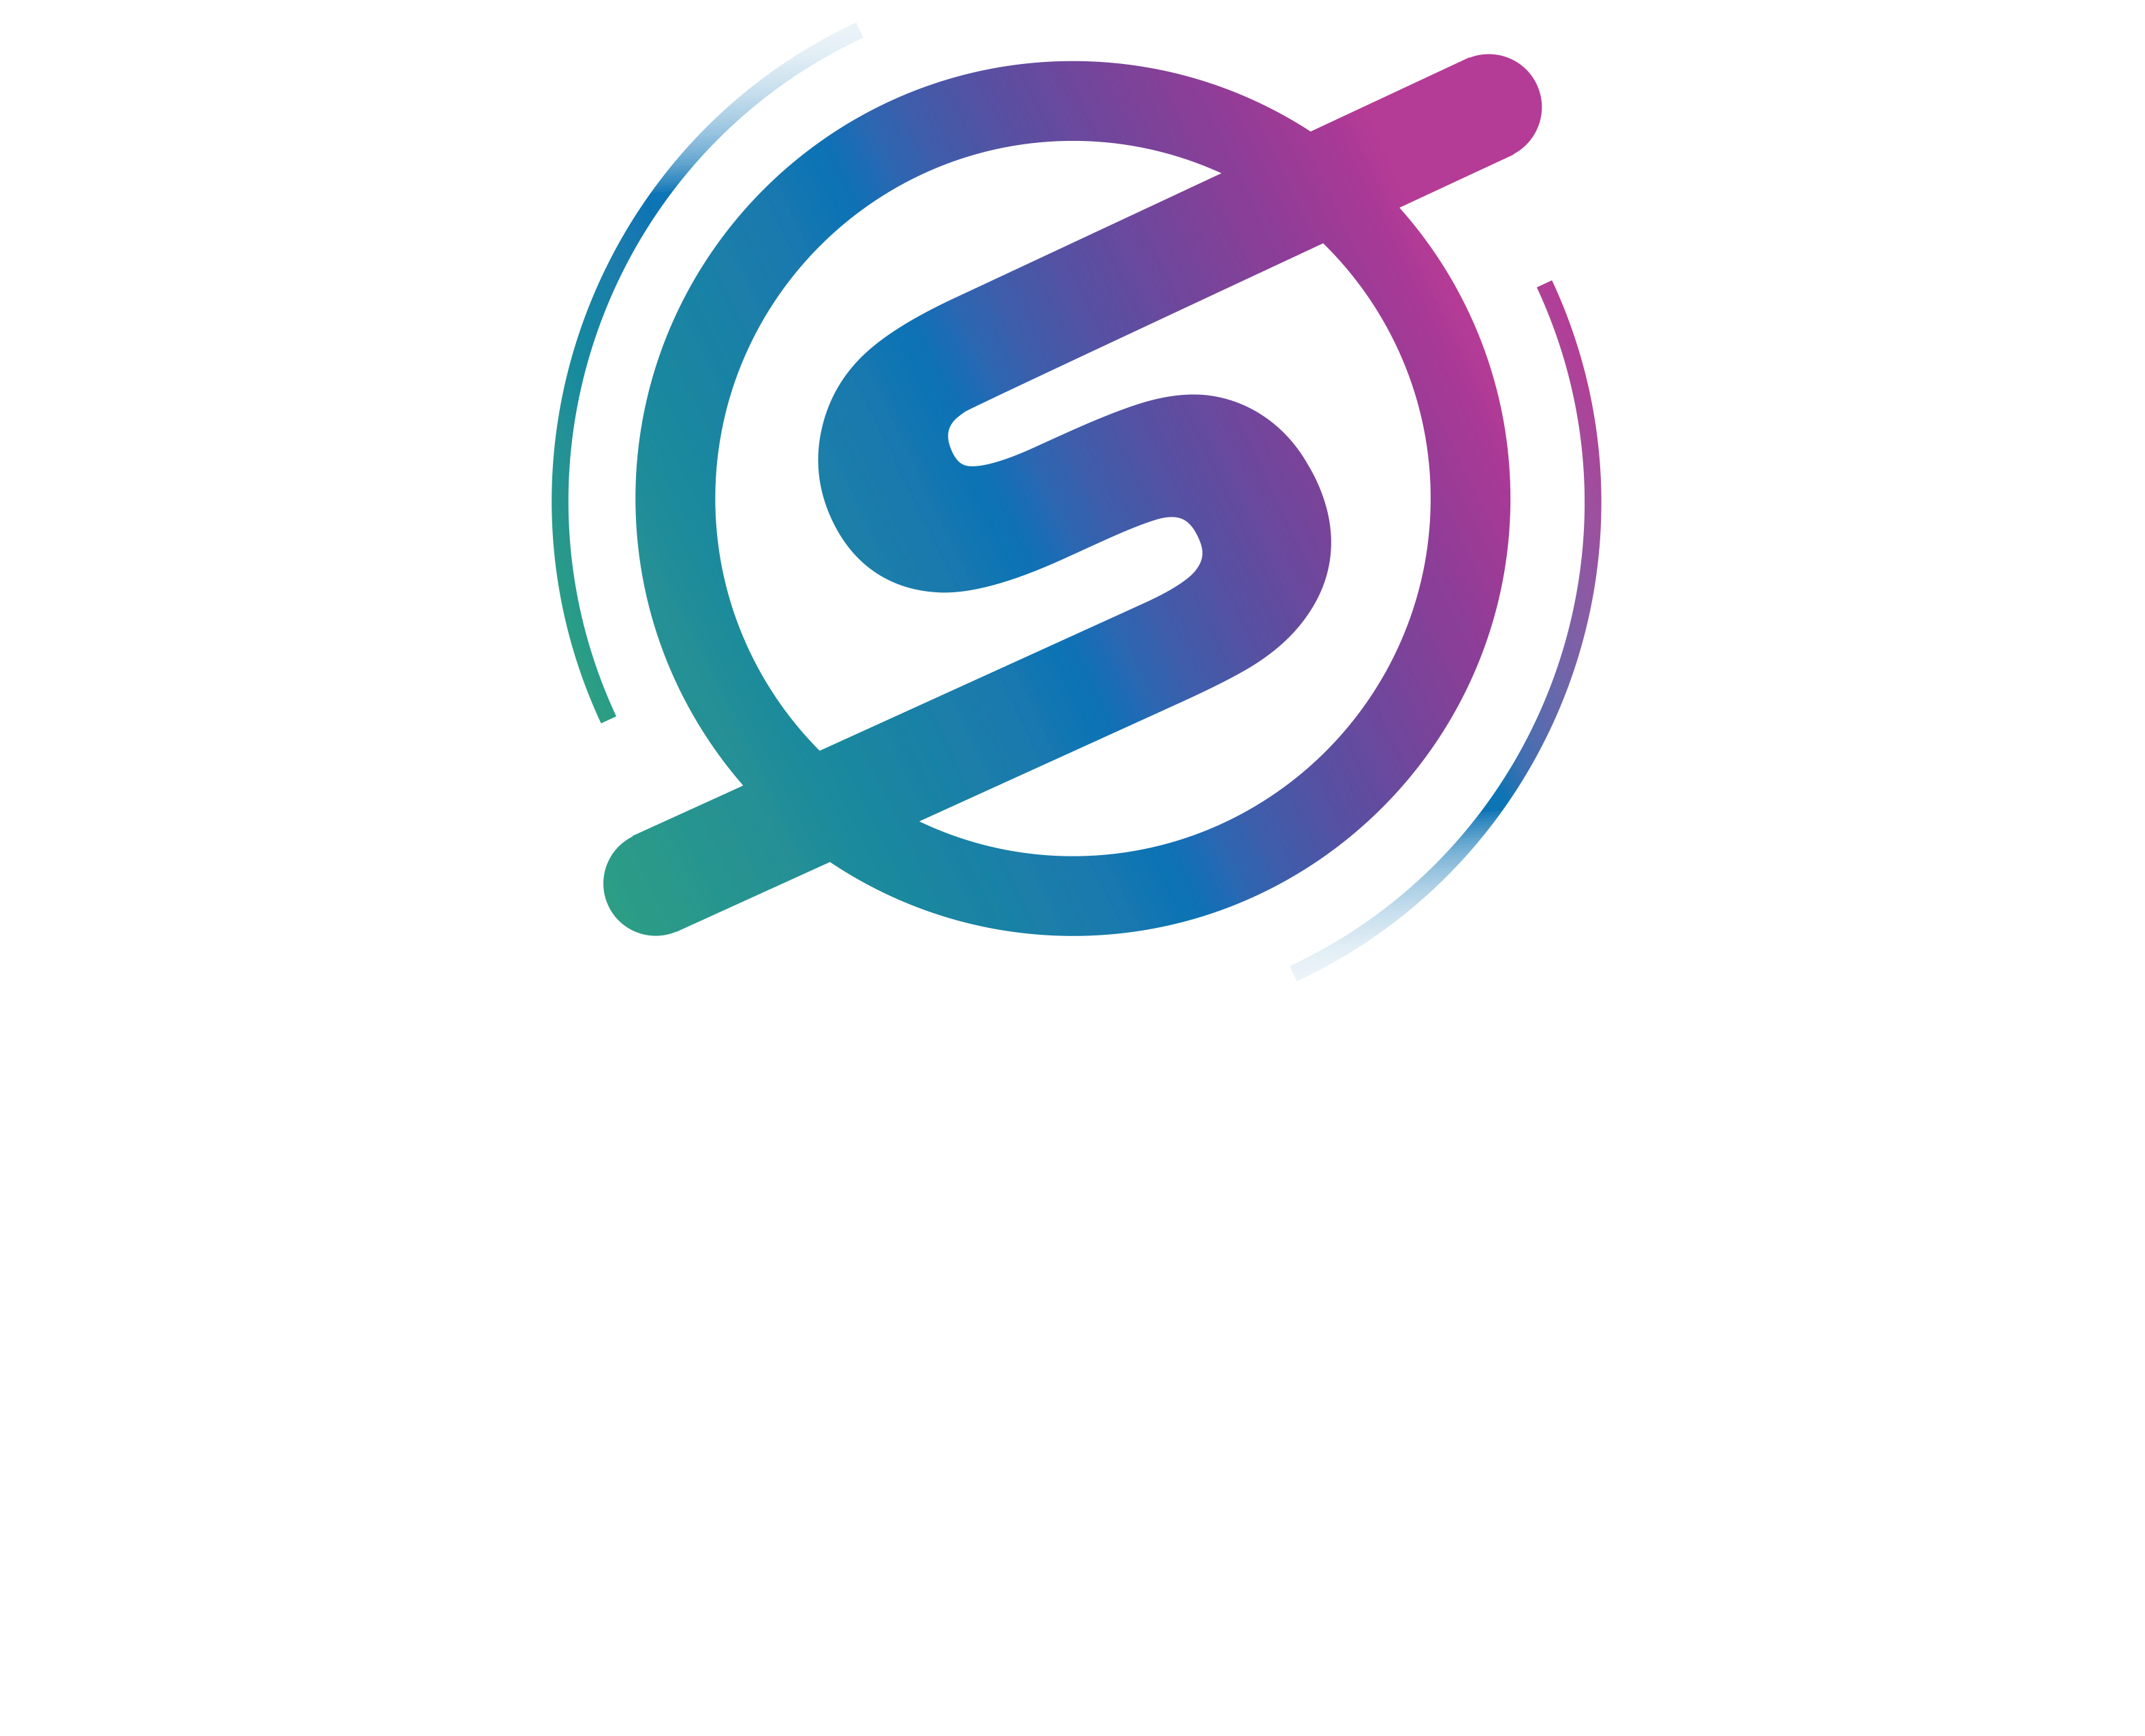 The Sounds DJ Services and Entertainment